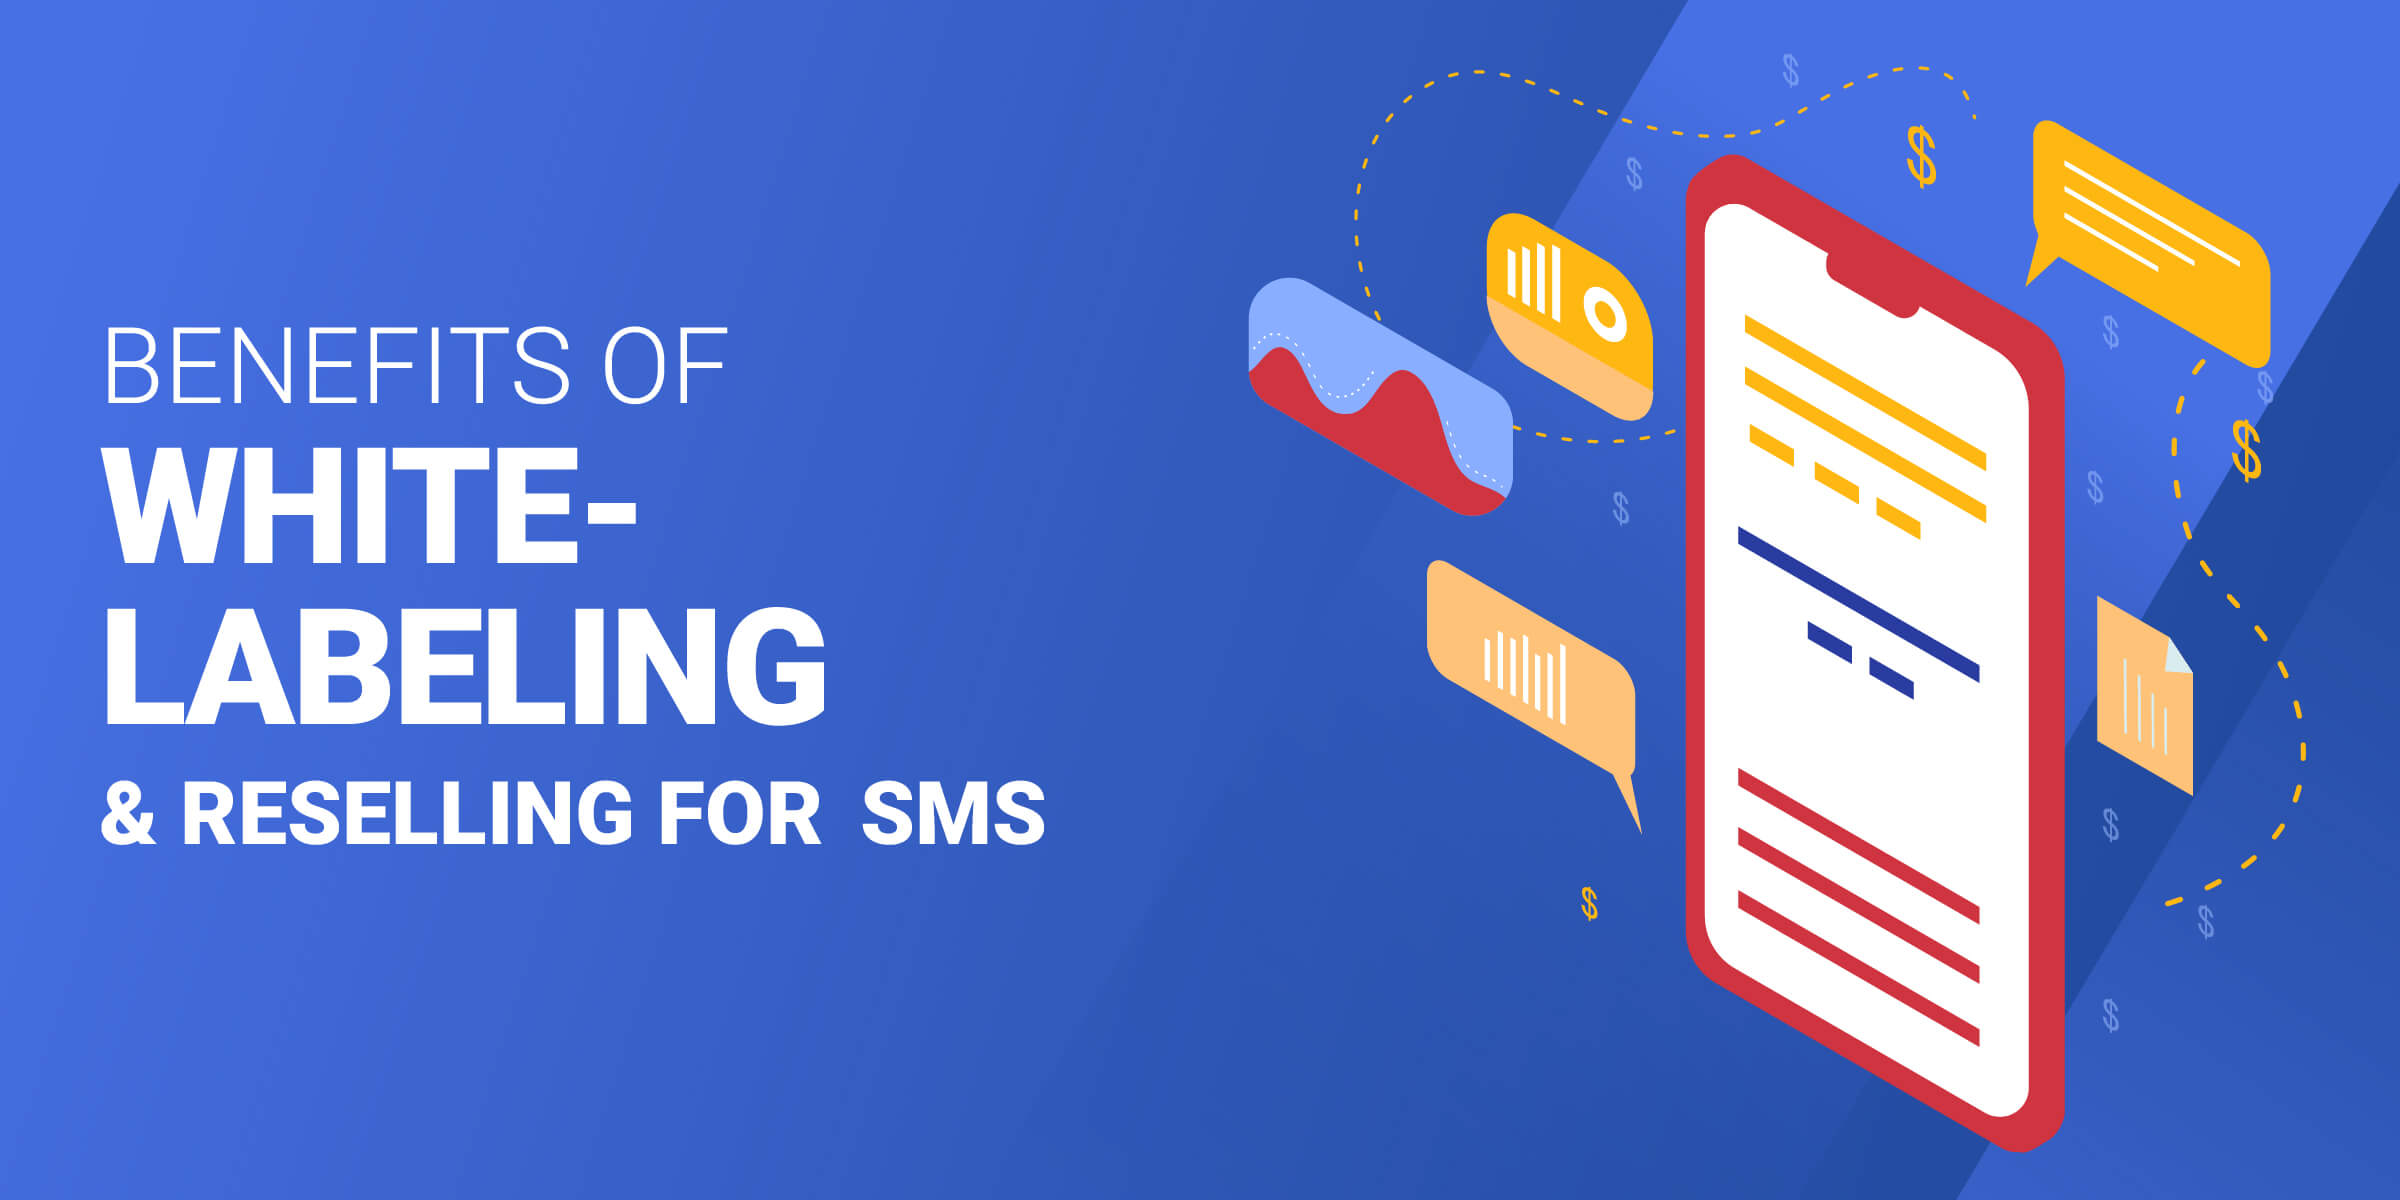 Benefits of White Labeling SMS